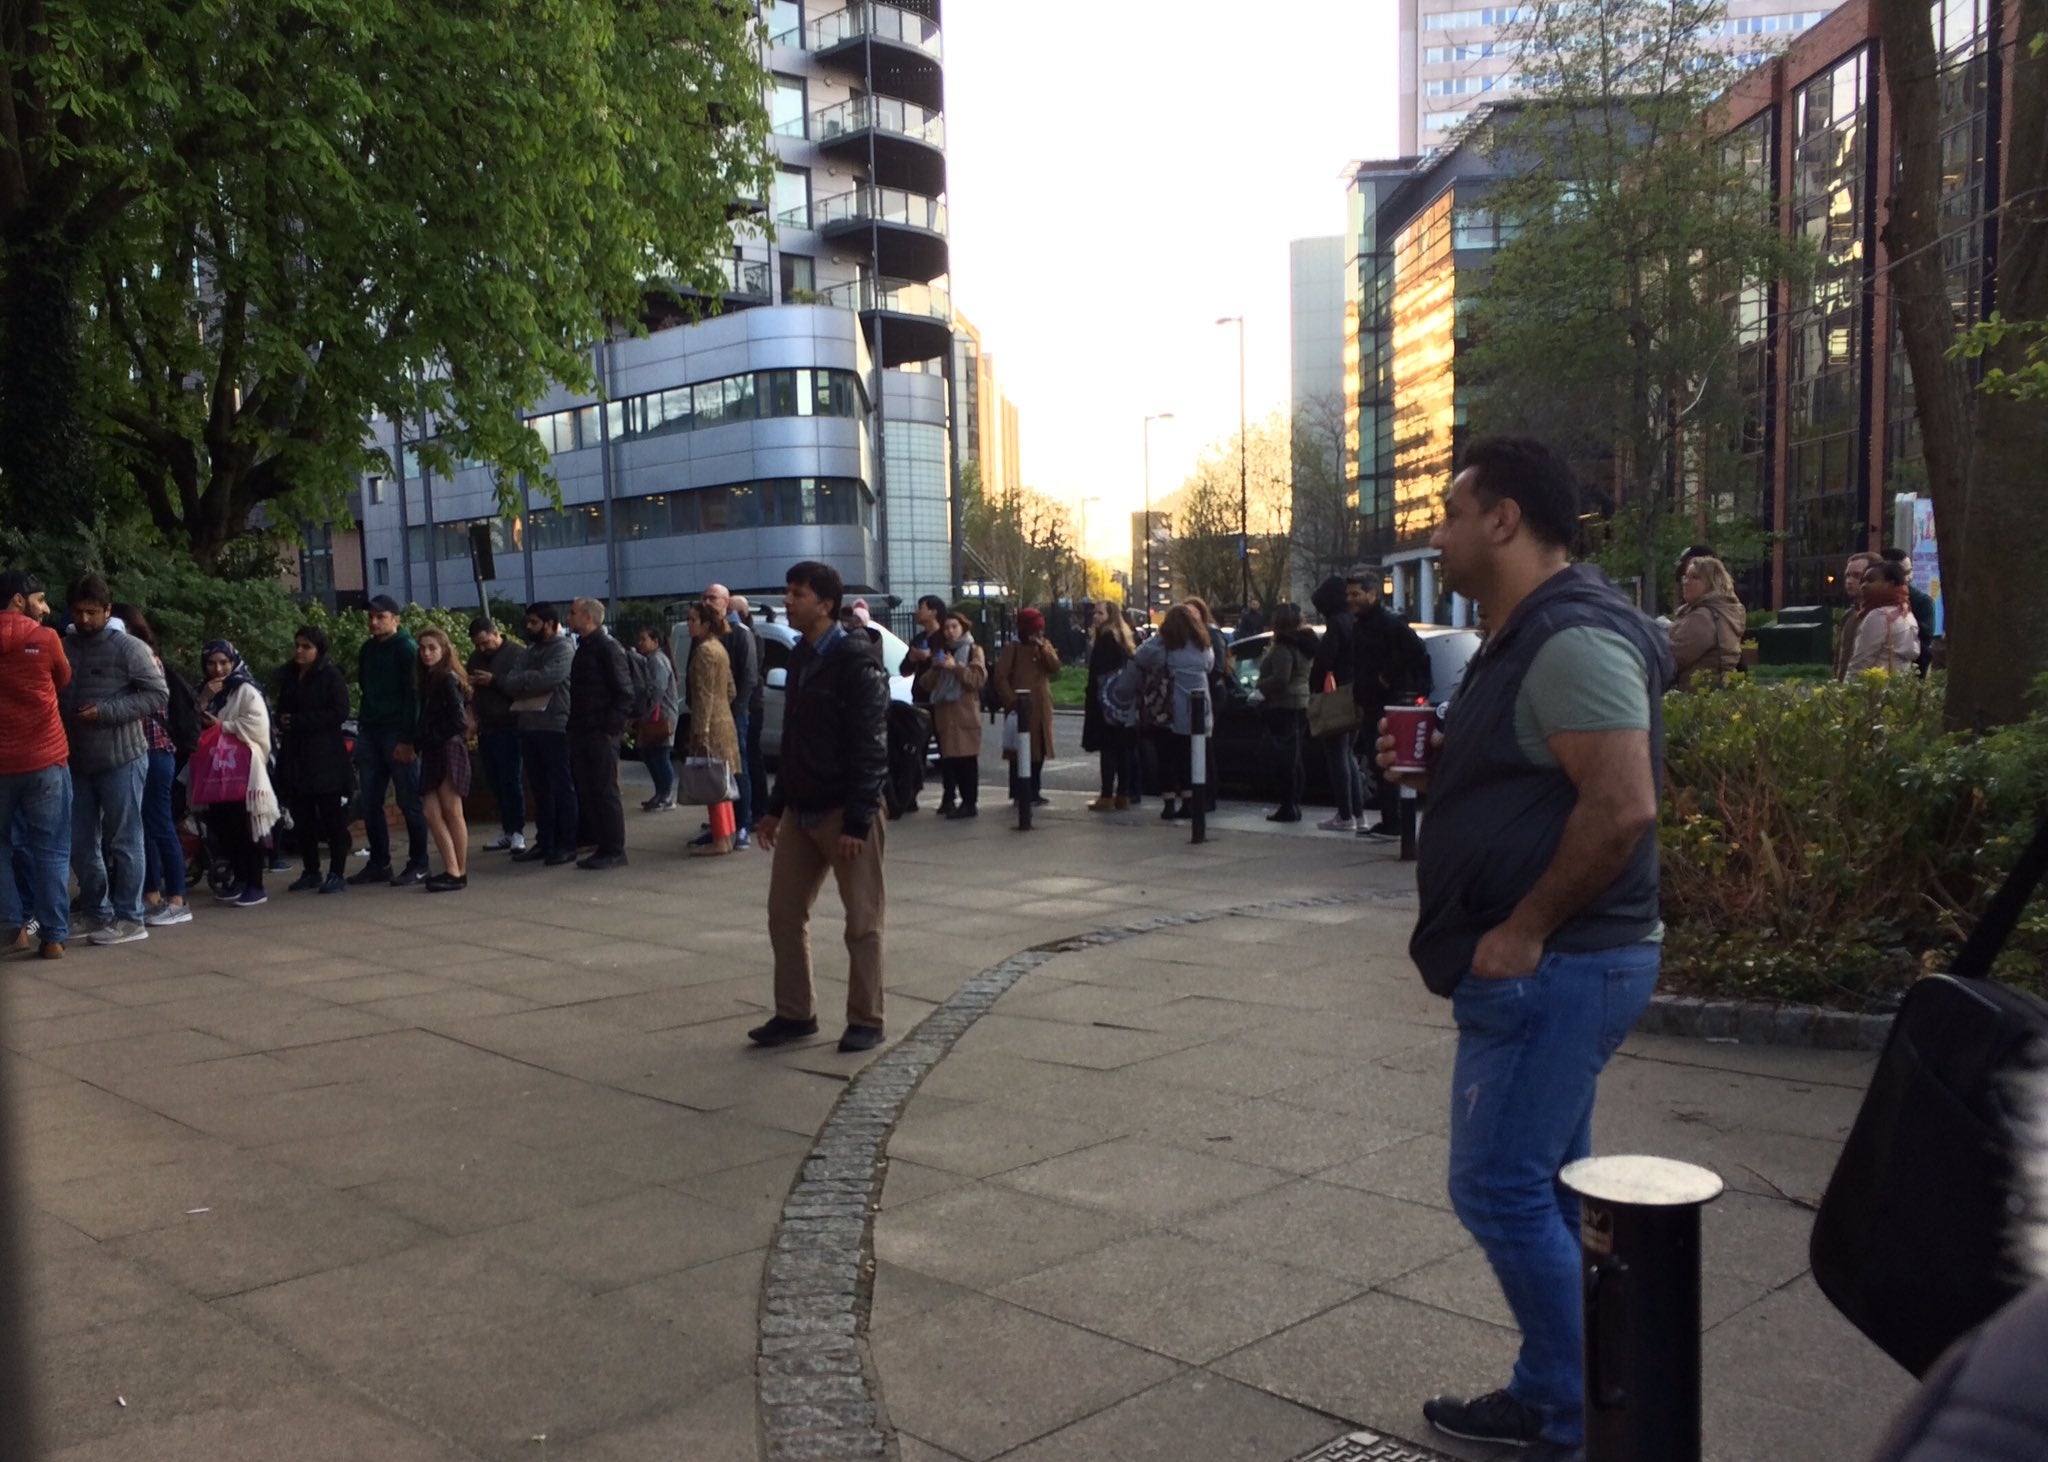 People who were waiting outside the Croydon centre said they felt ‘humiliated’